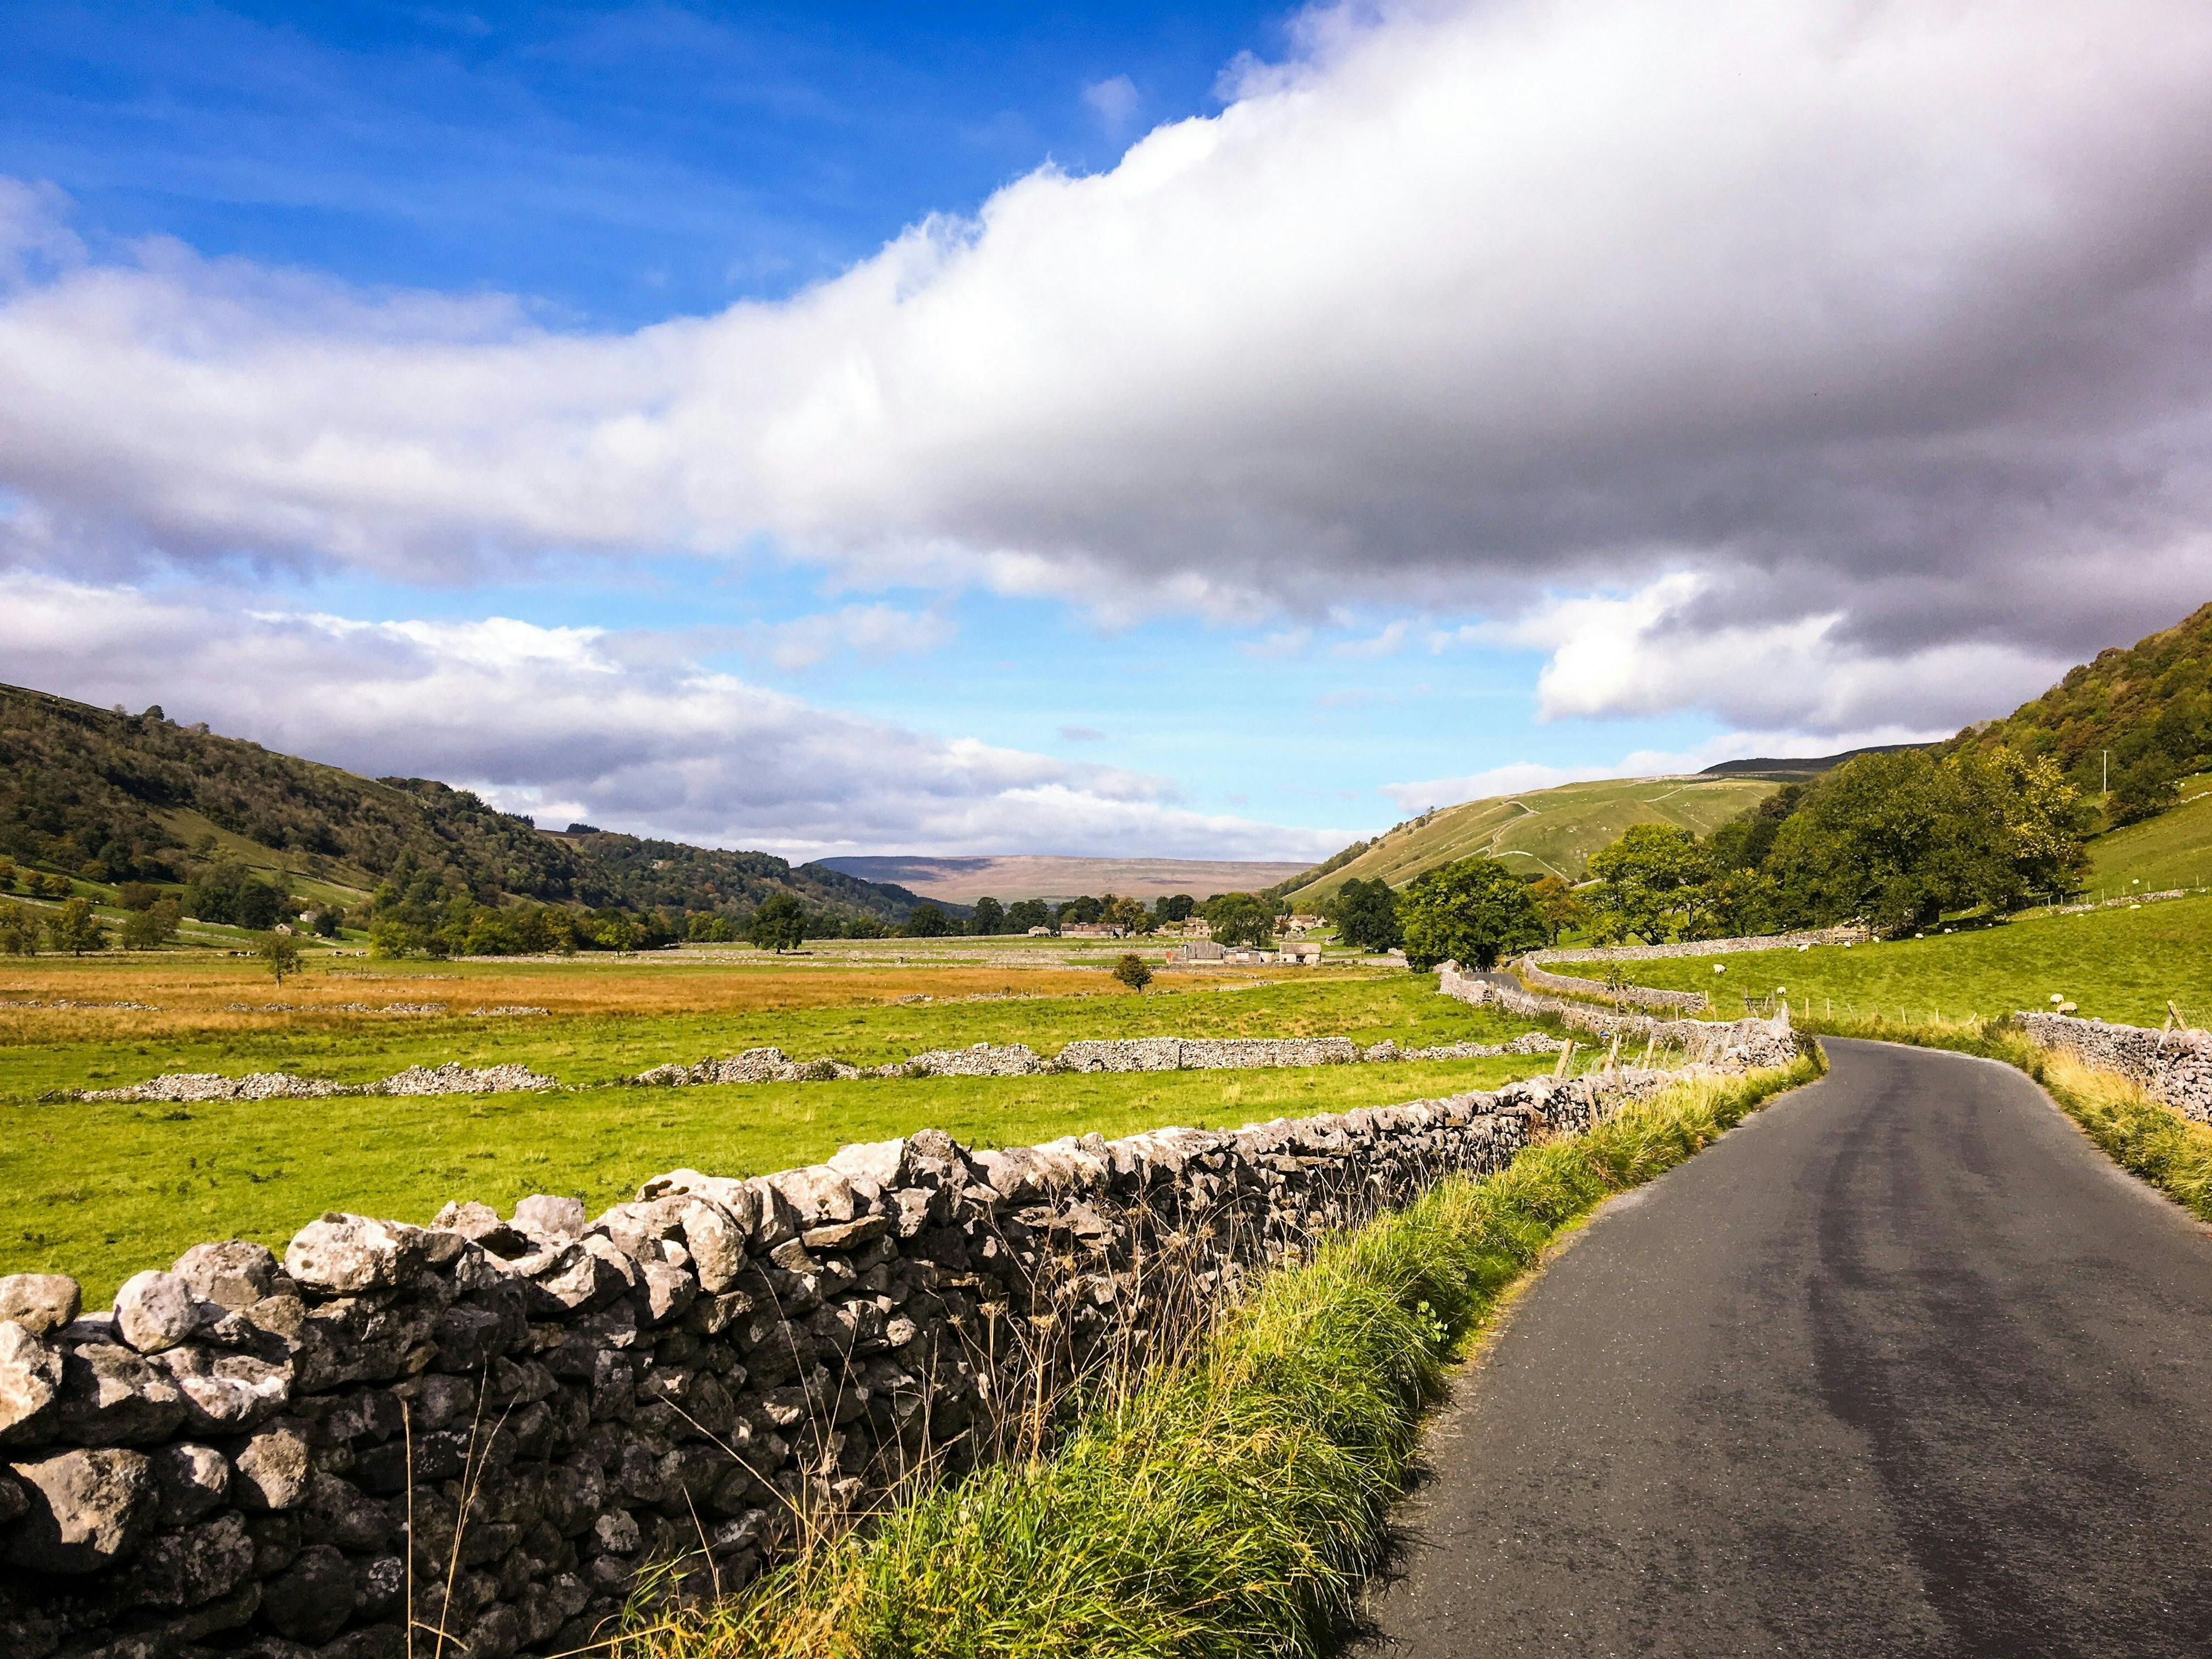 Road with dry stone walls on either side in Skipton, North Yorkshire